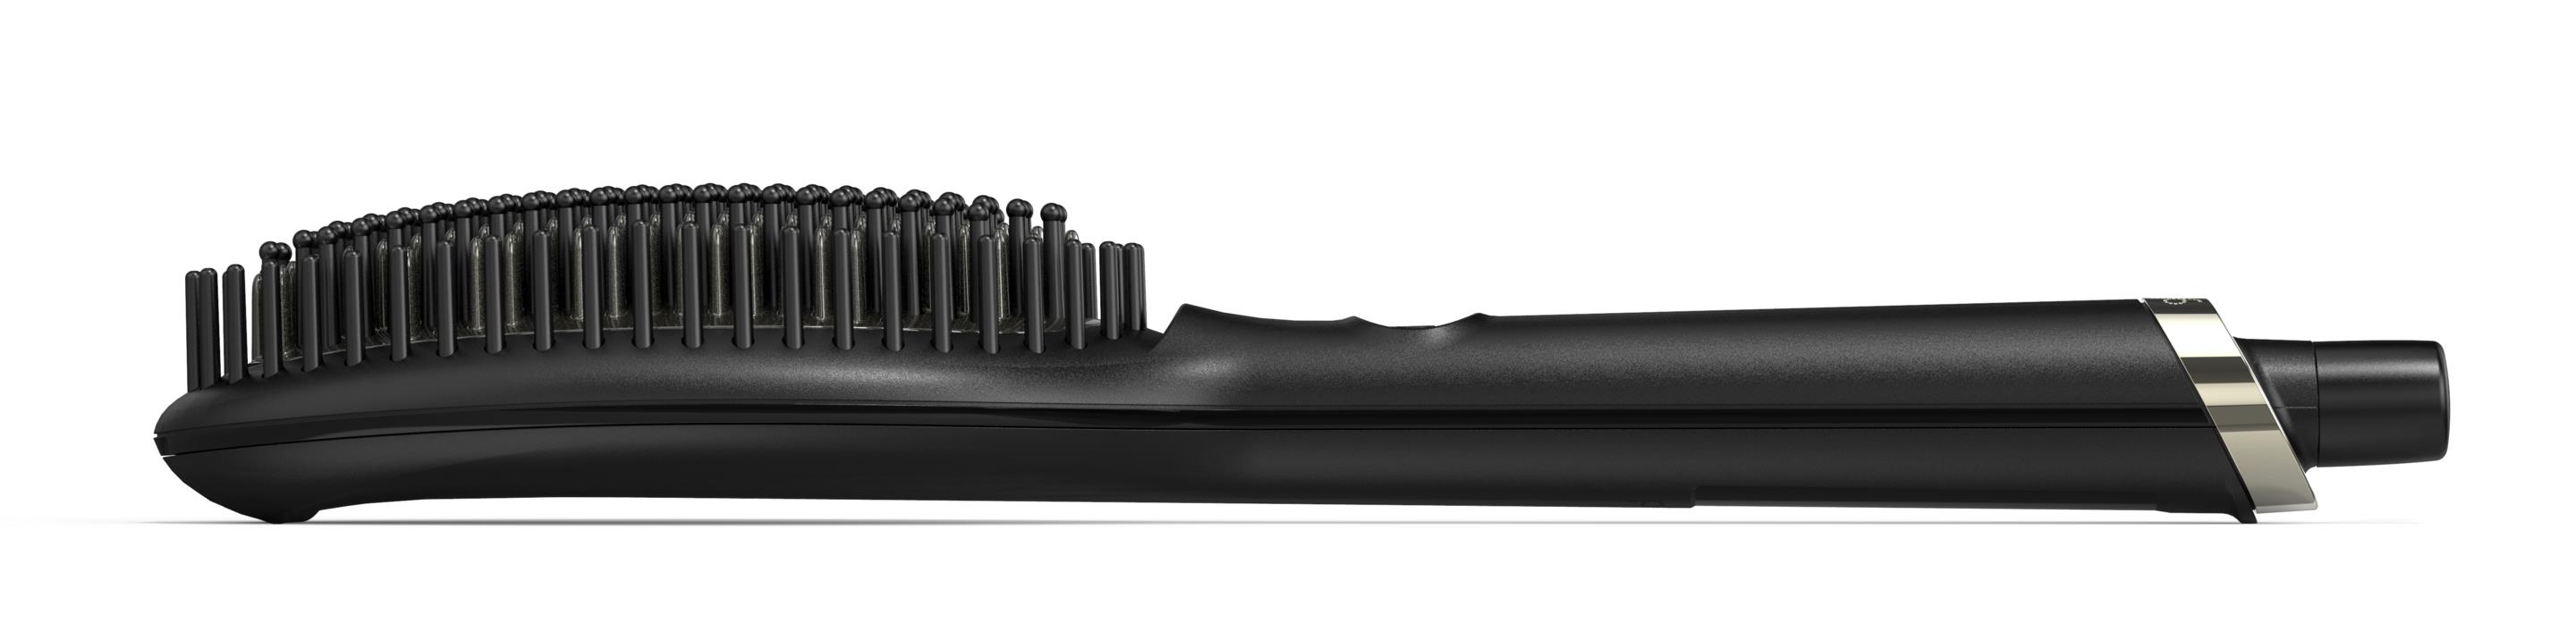 Ghd Glide Professional Hot Brush 1121 400 0000 2 ?ref=575280&w=2880&h=2880&mode=max&quality=75&format=jpg